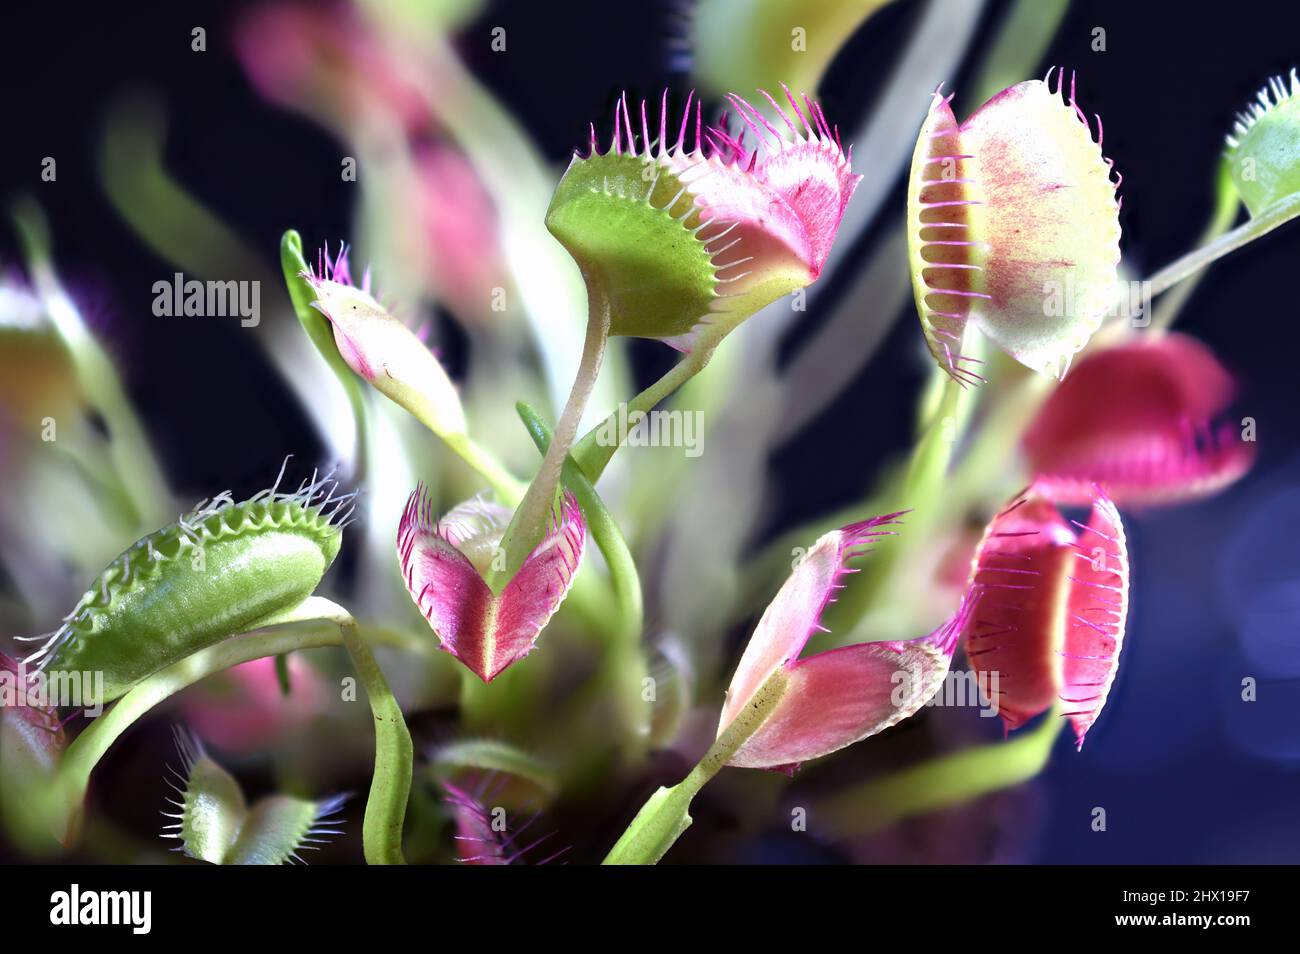 Venus fly Trap Close Up photographed on a dark background. It catches its prey chiefly insects and arachnids. Stock Photo